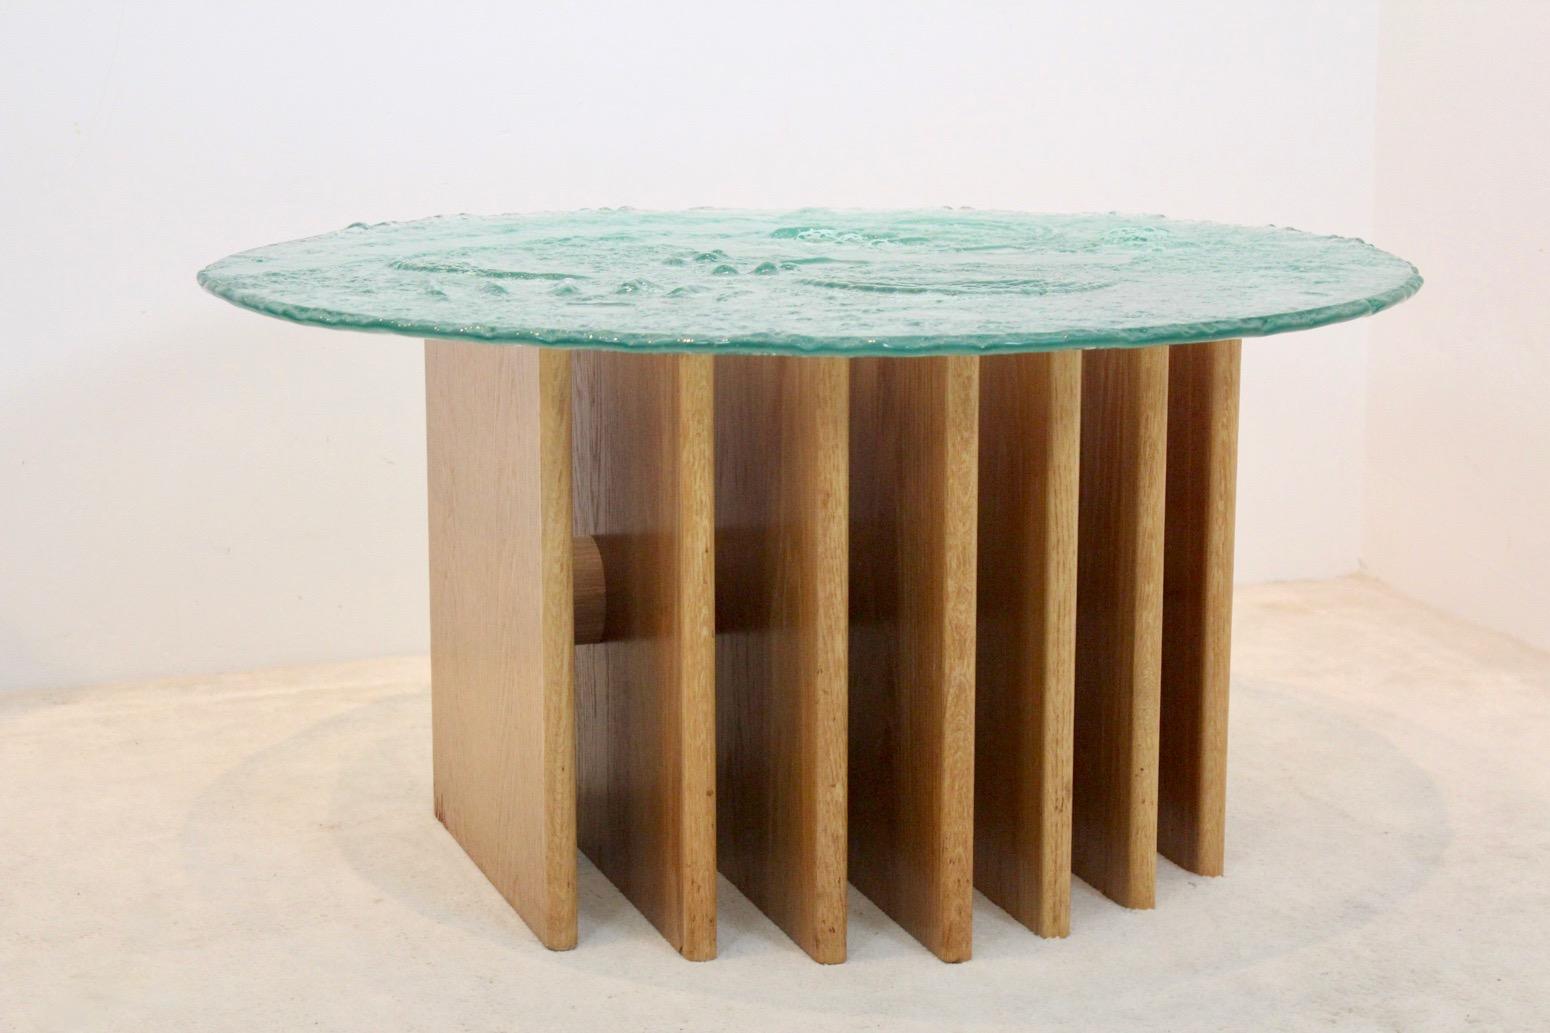 A truly beautiful Brutalist glass top coffee table based on a 7-ribs wooden base. Designed by the German artist Heinz Lilienthal in the 1970s. The wood is very solid and made with oak-veneer and the glass top is very thick and massive and with a